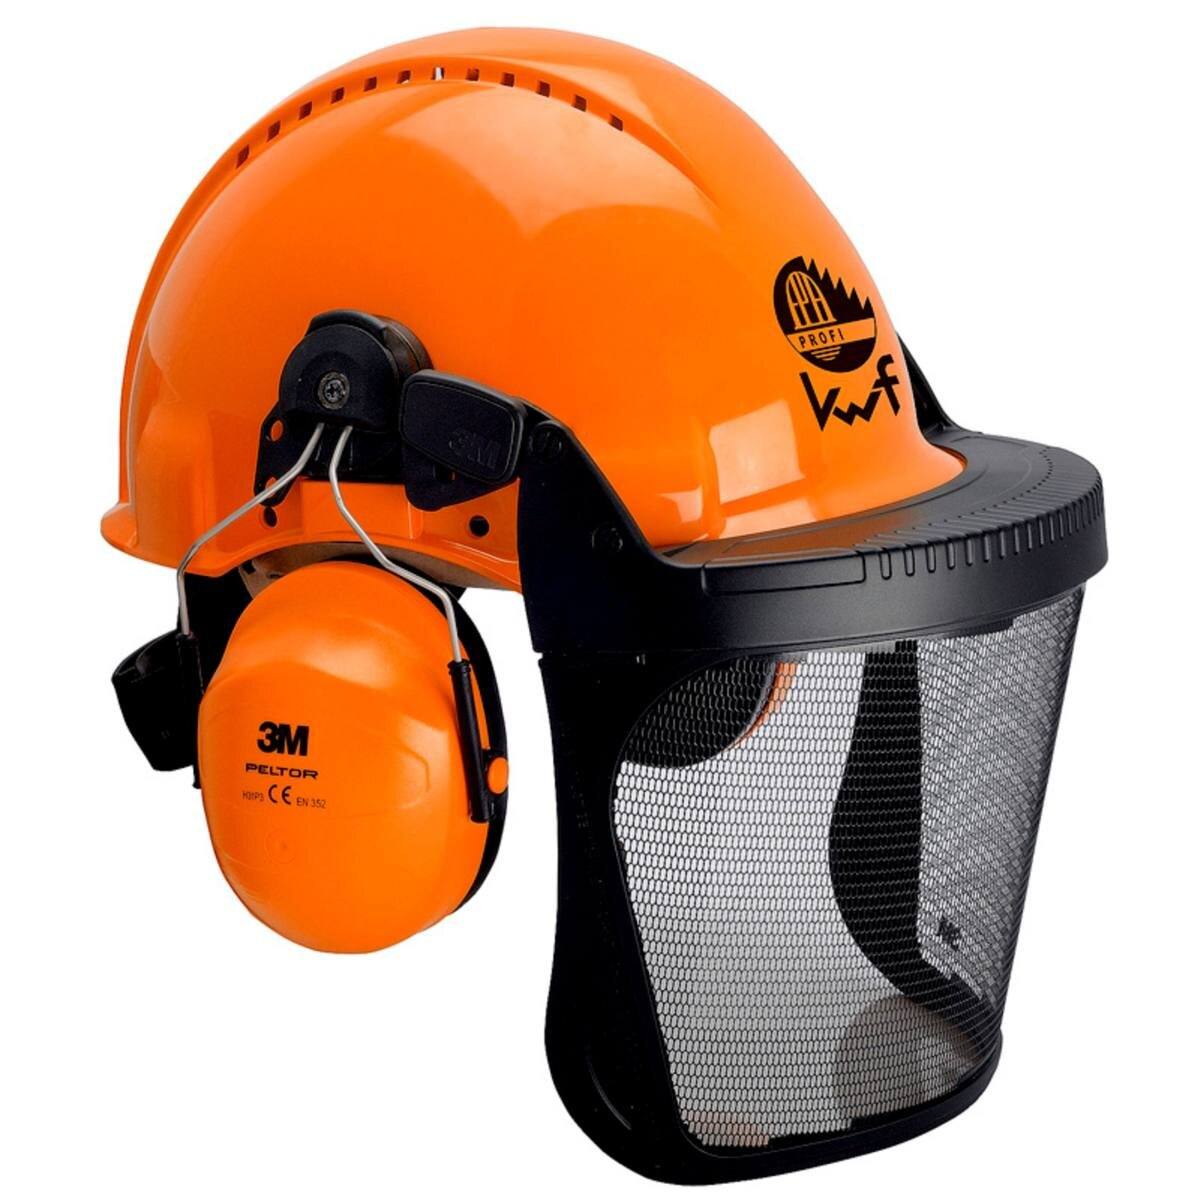 3M G3000 head protection combination 3MO315J in orange with H31P3E capsules, ratchet system, visor 5J etched metal, leather sweatband, KWF logo